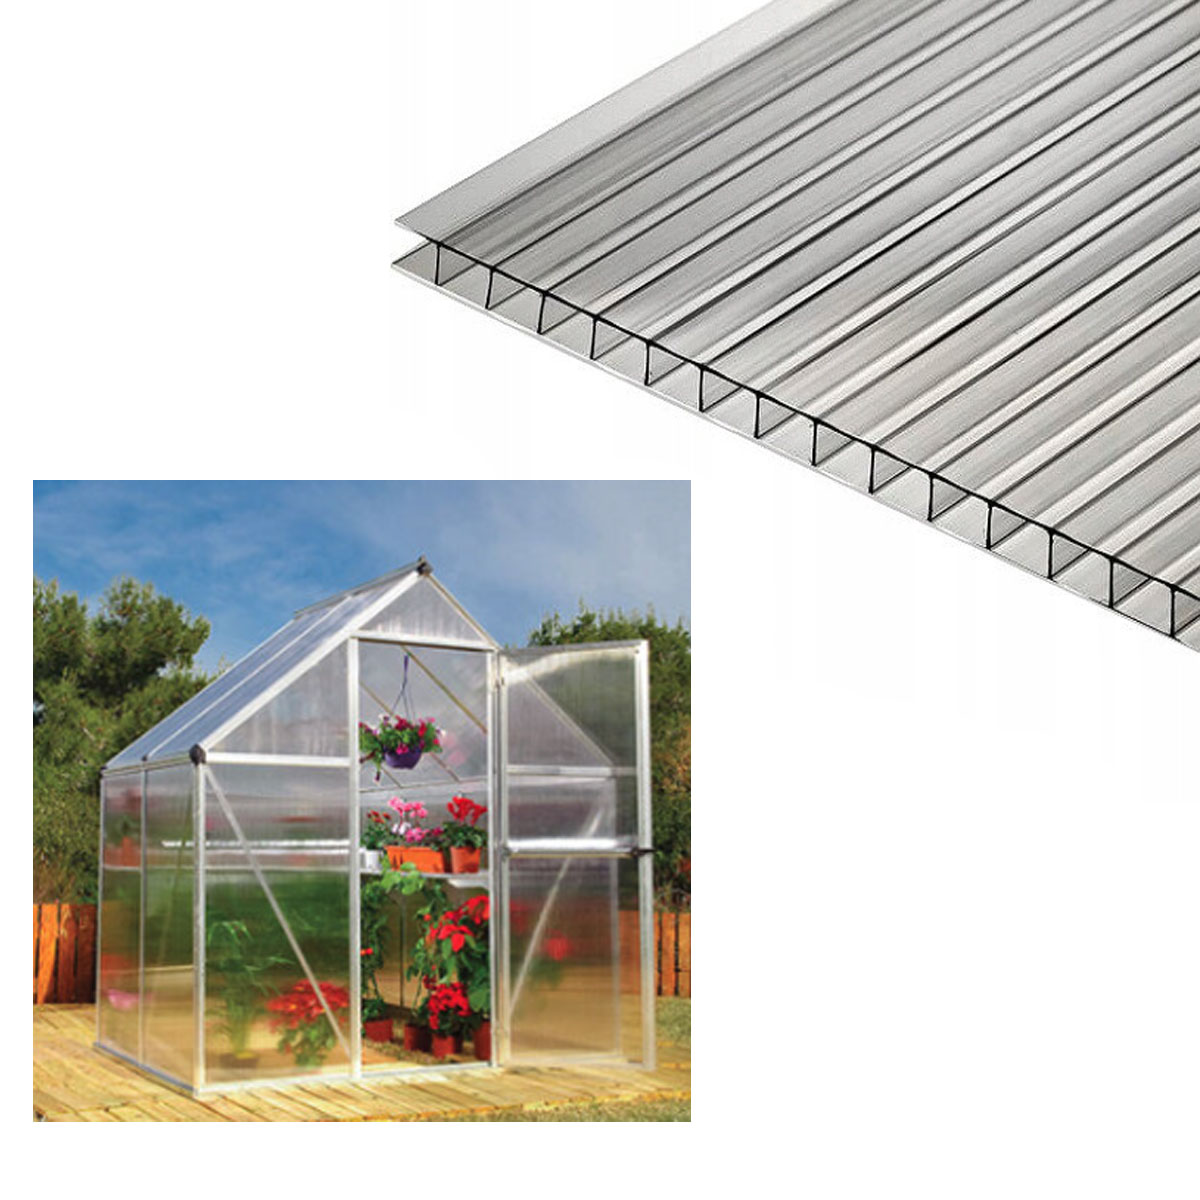 4mm Greenhouse Polycarbonate Sheets Glazing Replacement Repair Panels